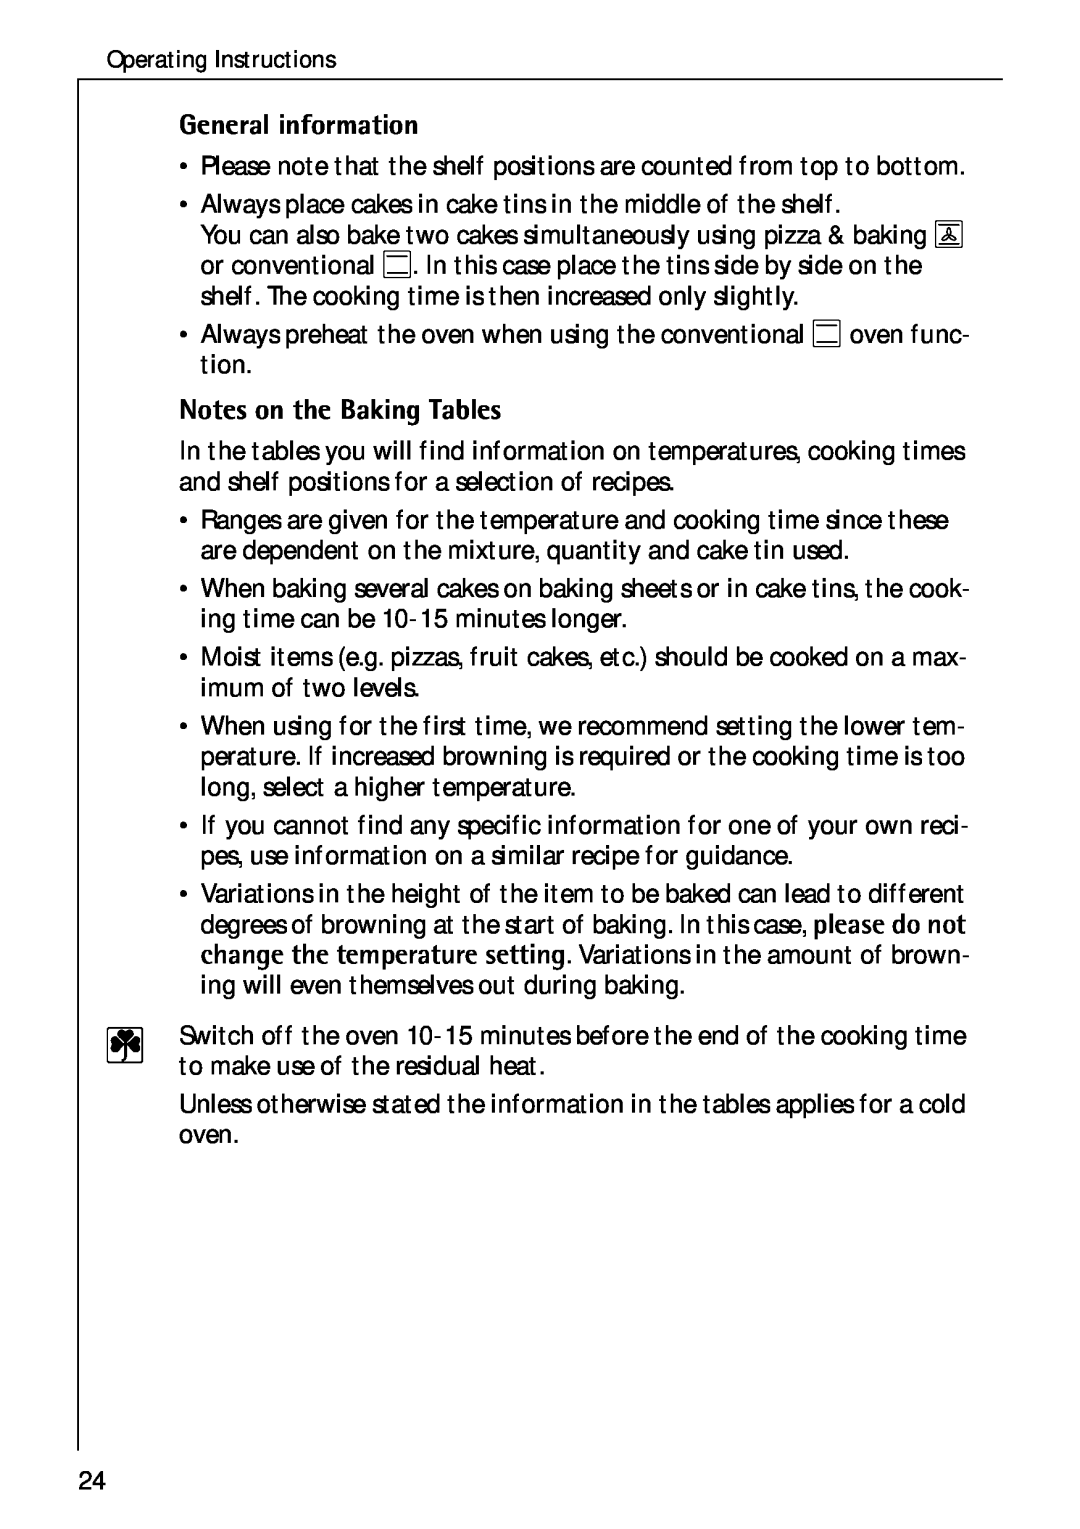 Electrolux B 4100 manual General information, Notes on the Baking Tables 